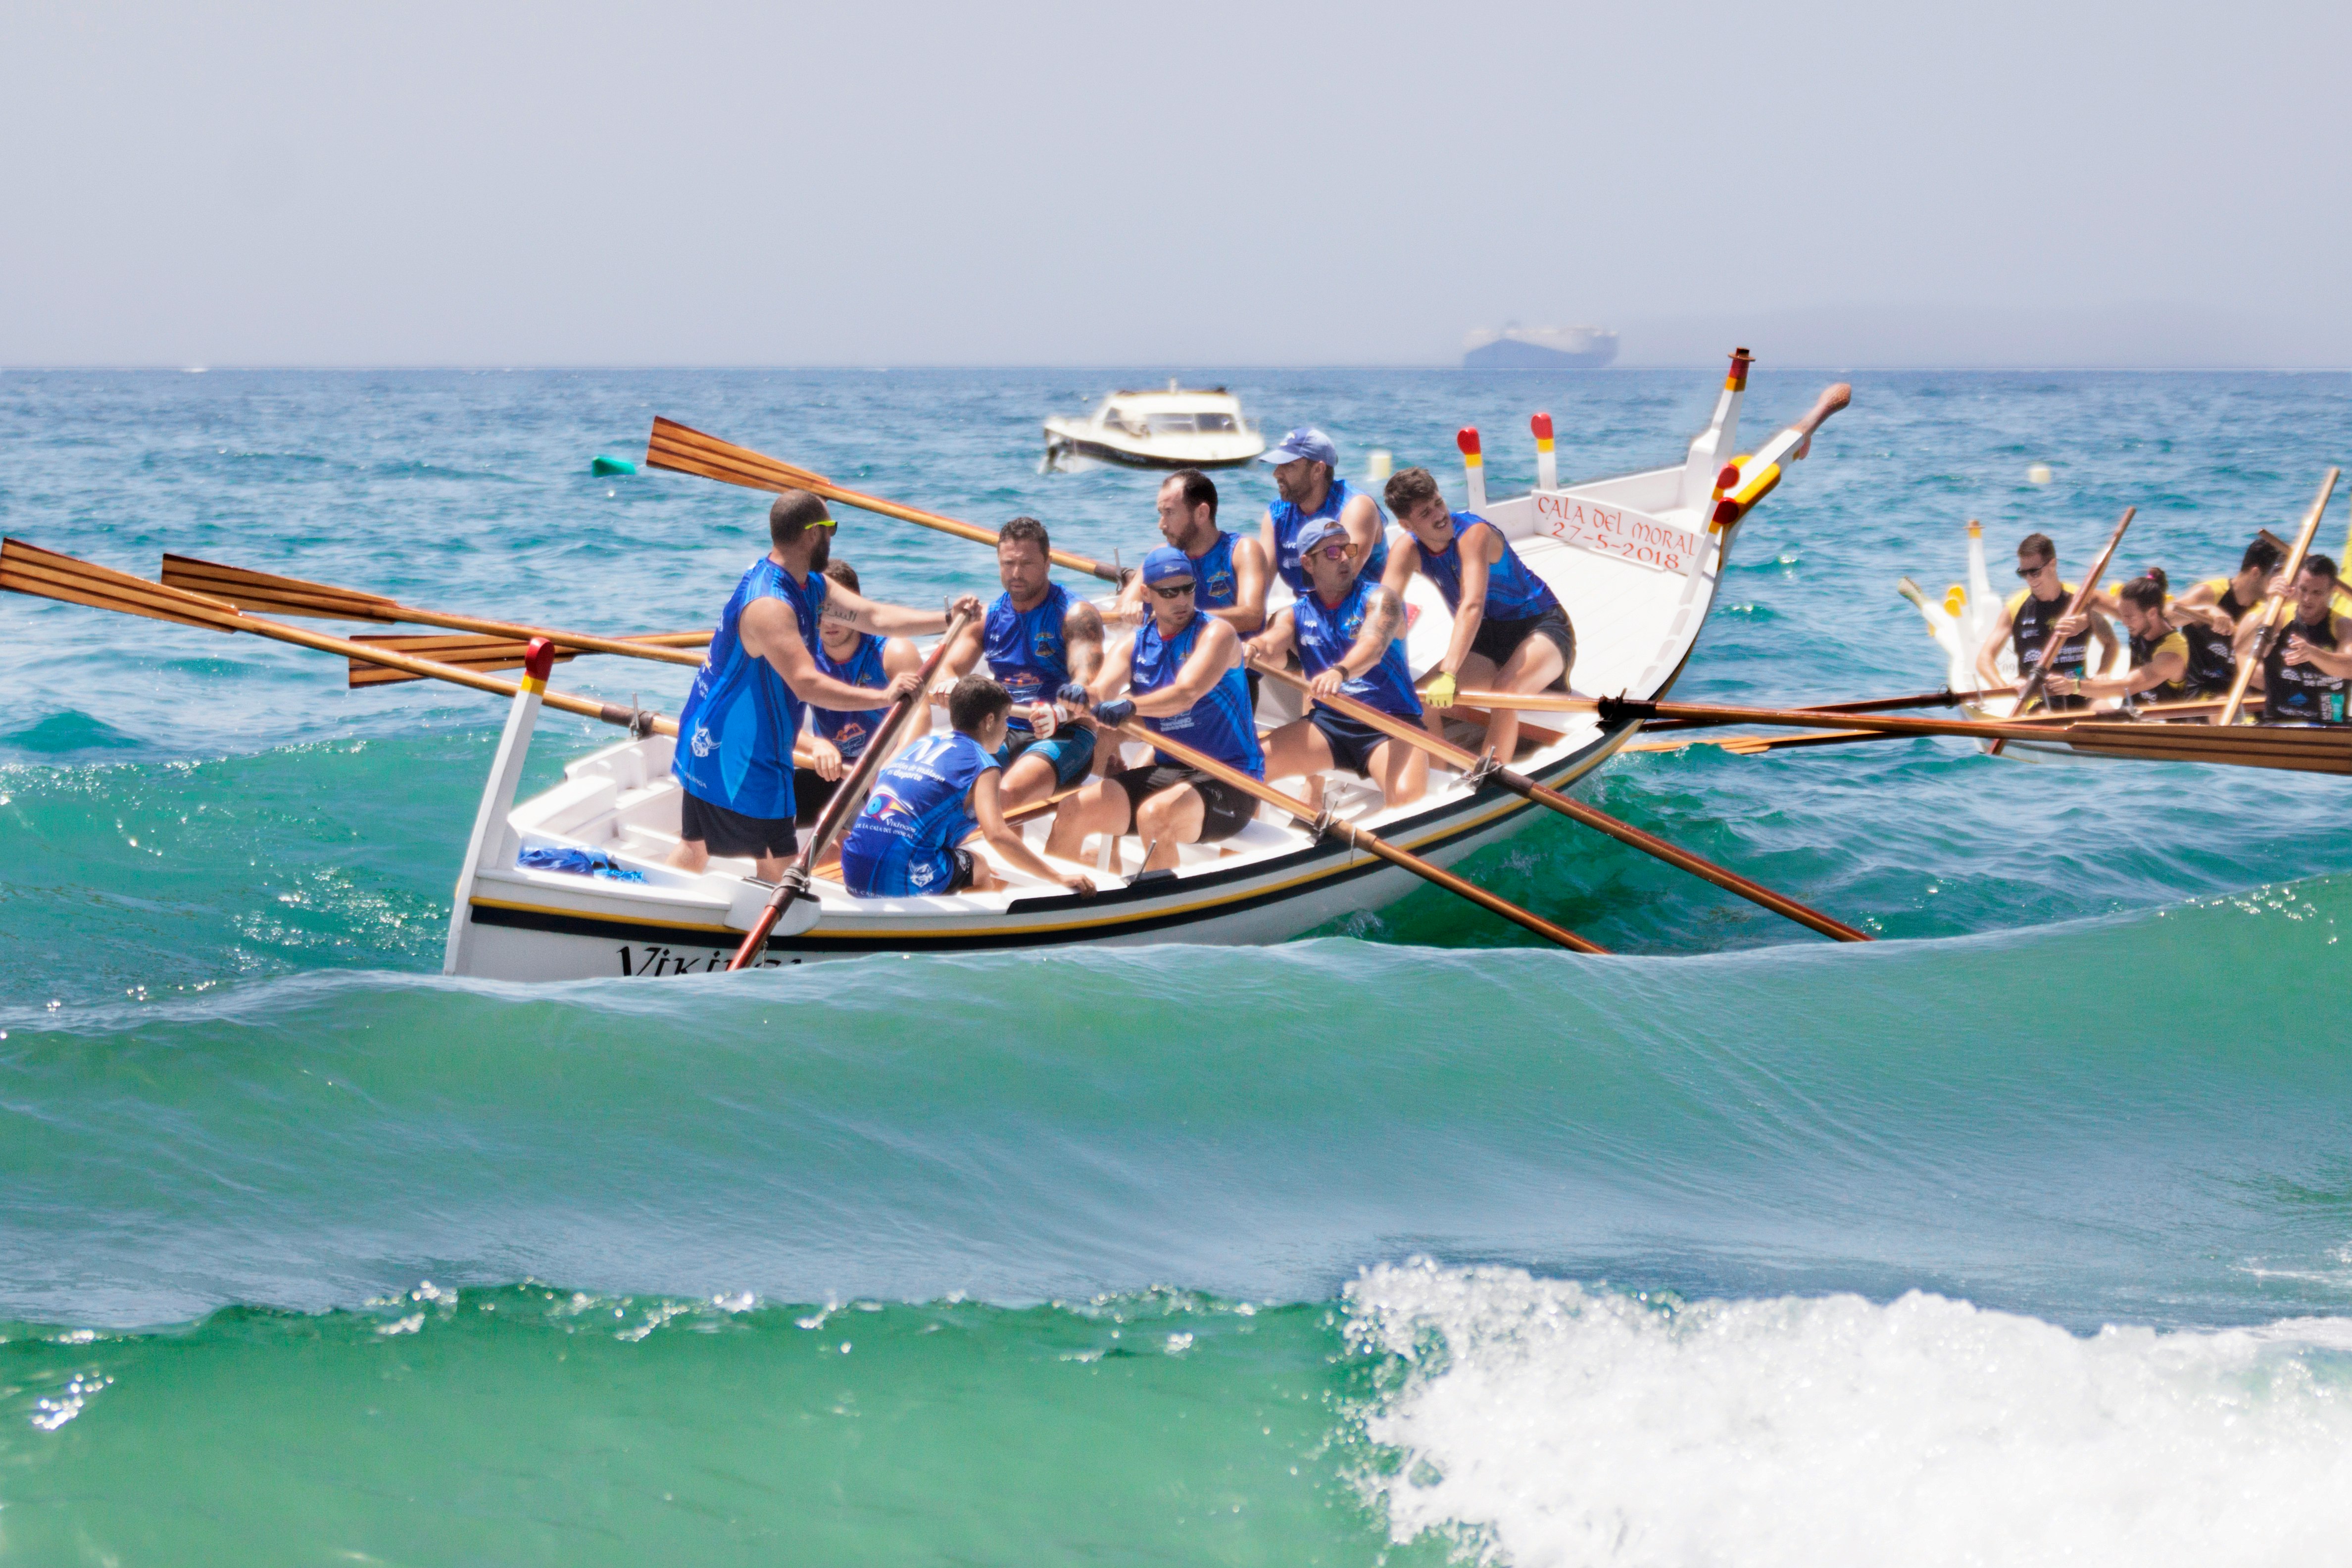 people riding on blue and white boat on sea during daytime